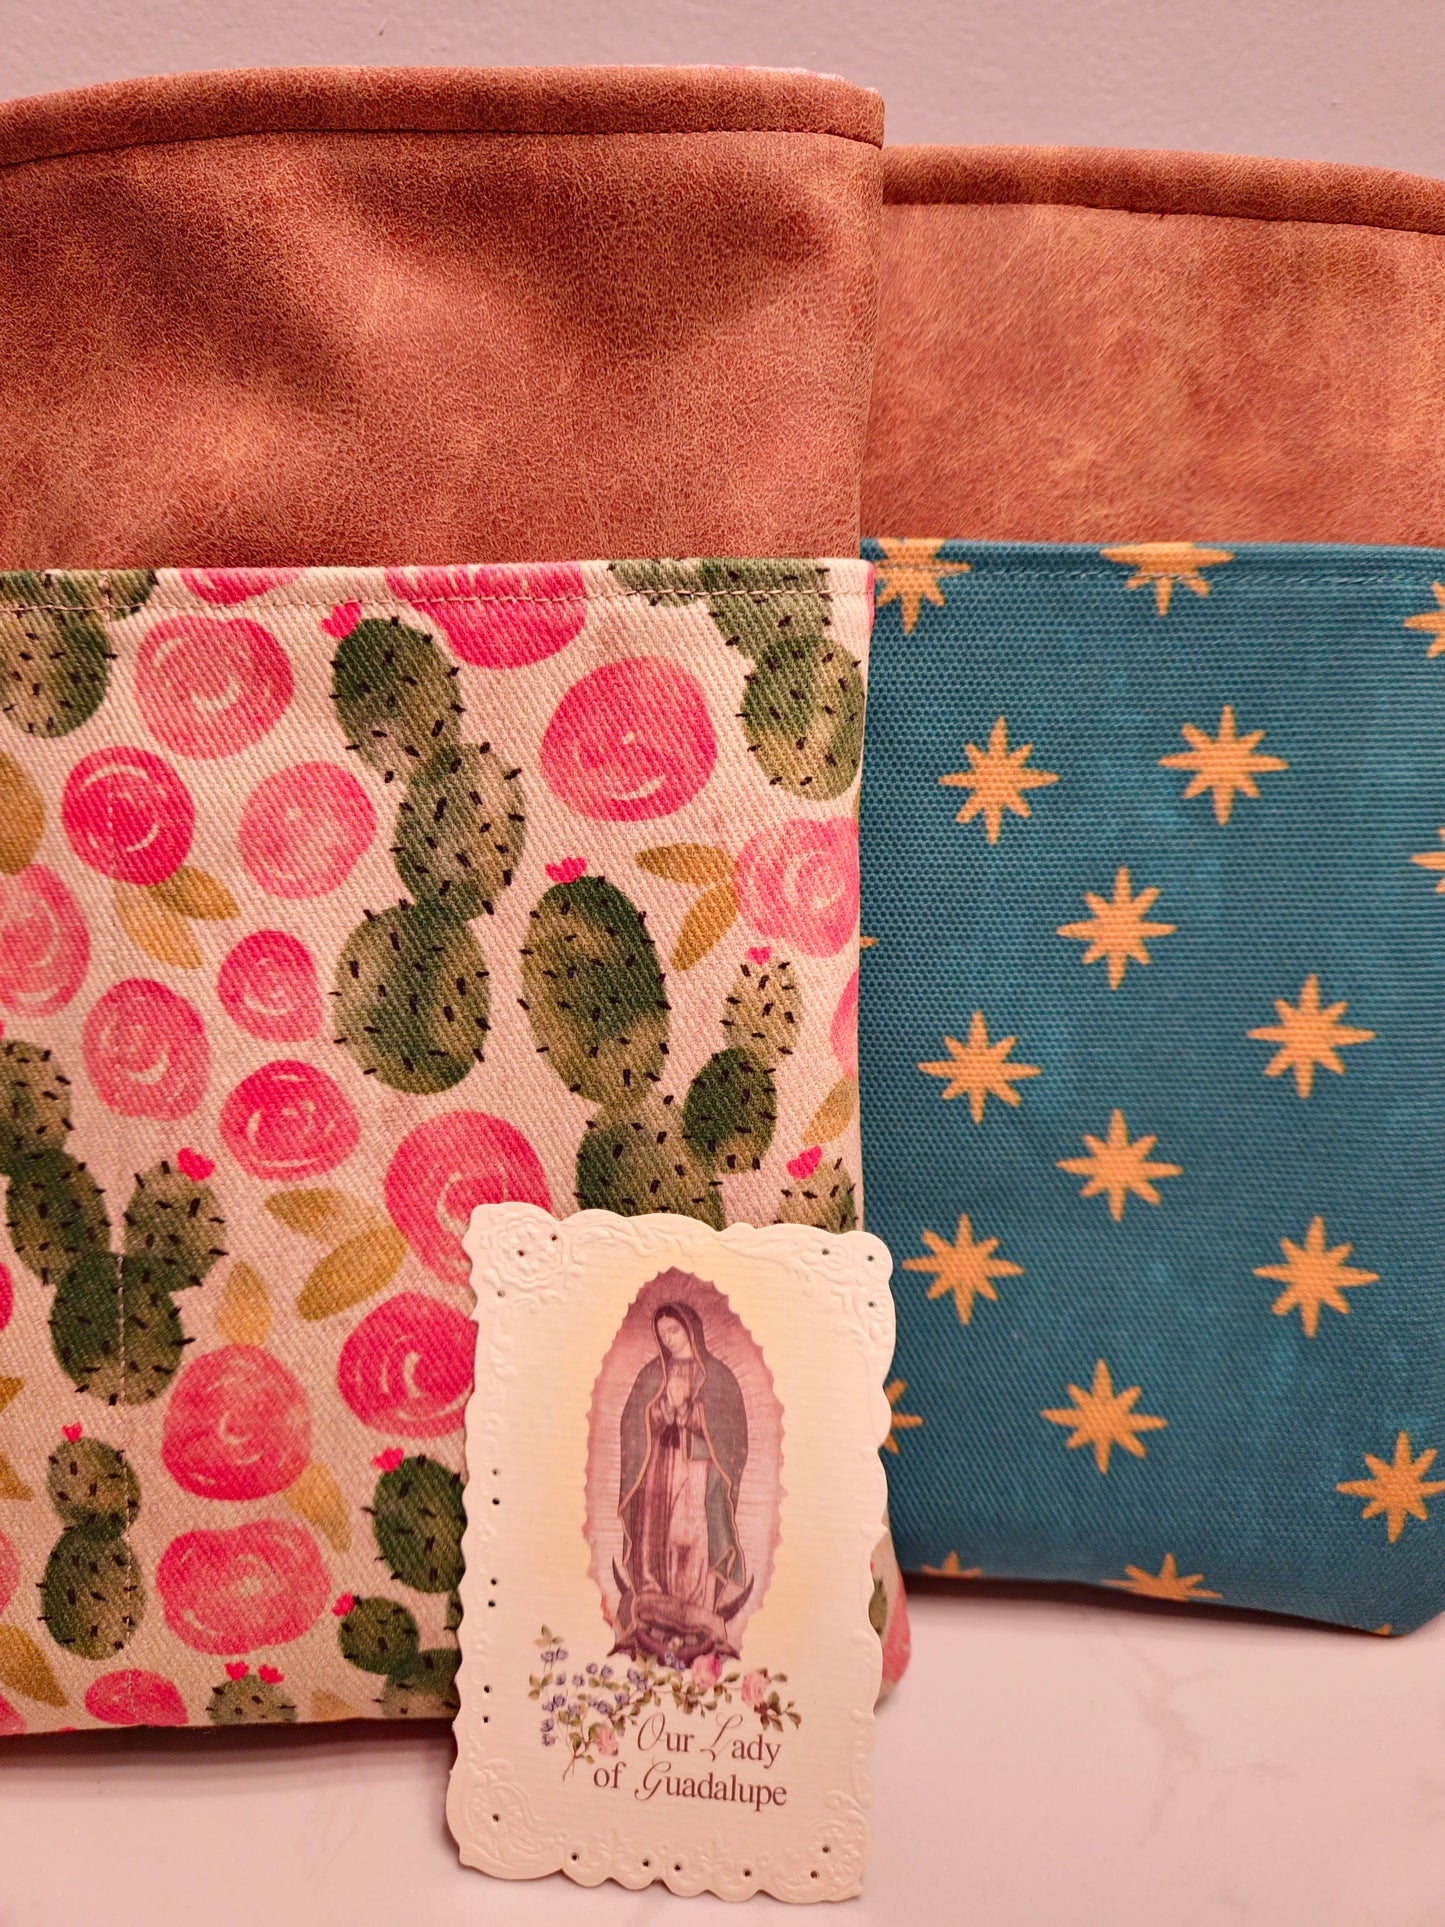 Book Sleeve Our Lady of Guadalupe Catholic fabric for Journal Bibles Planners Aztec Print